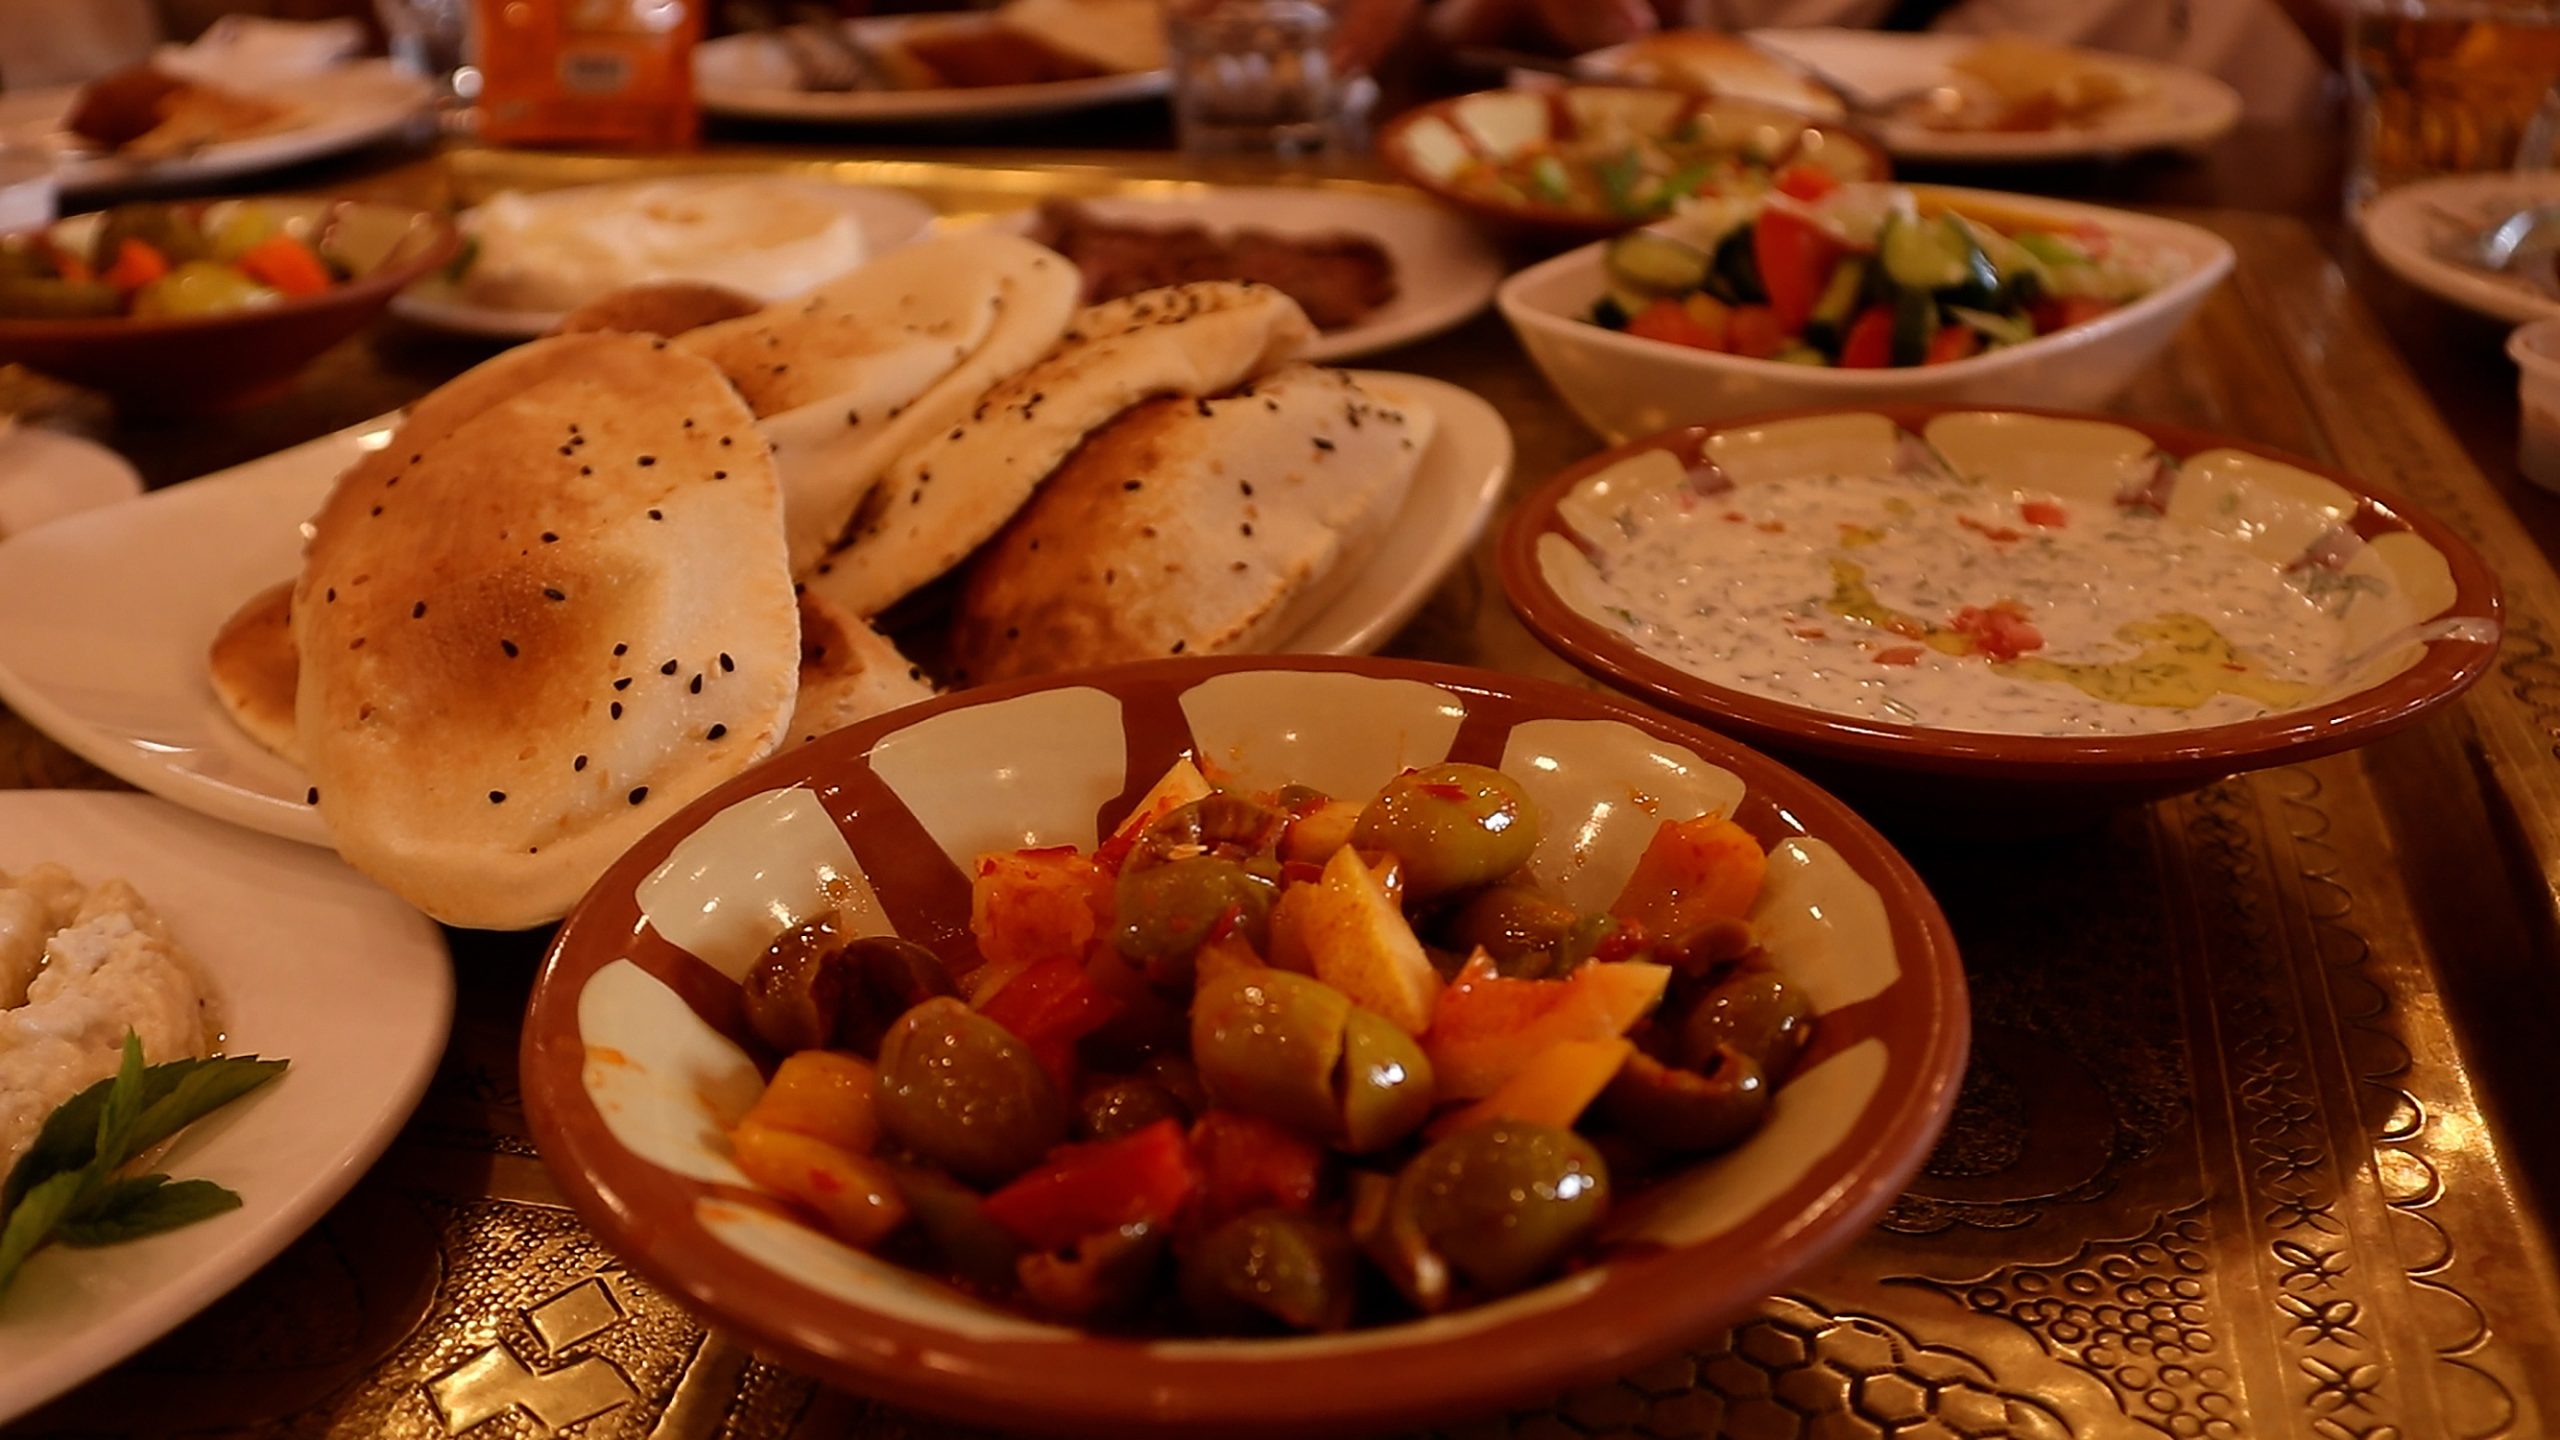 Jordanian Barbecue and Mezze Dishes.